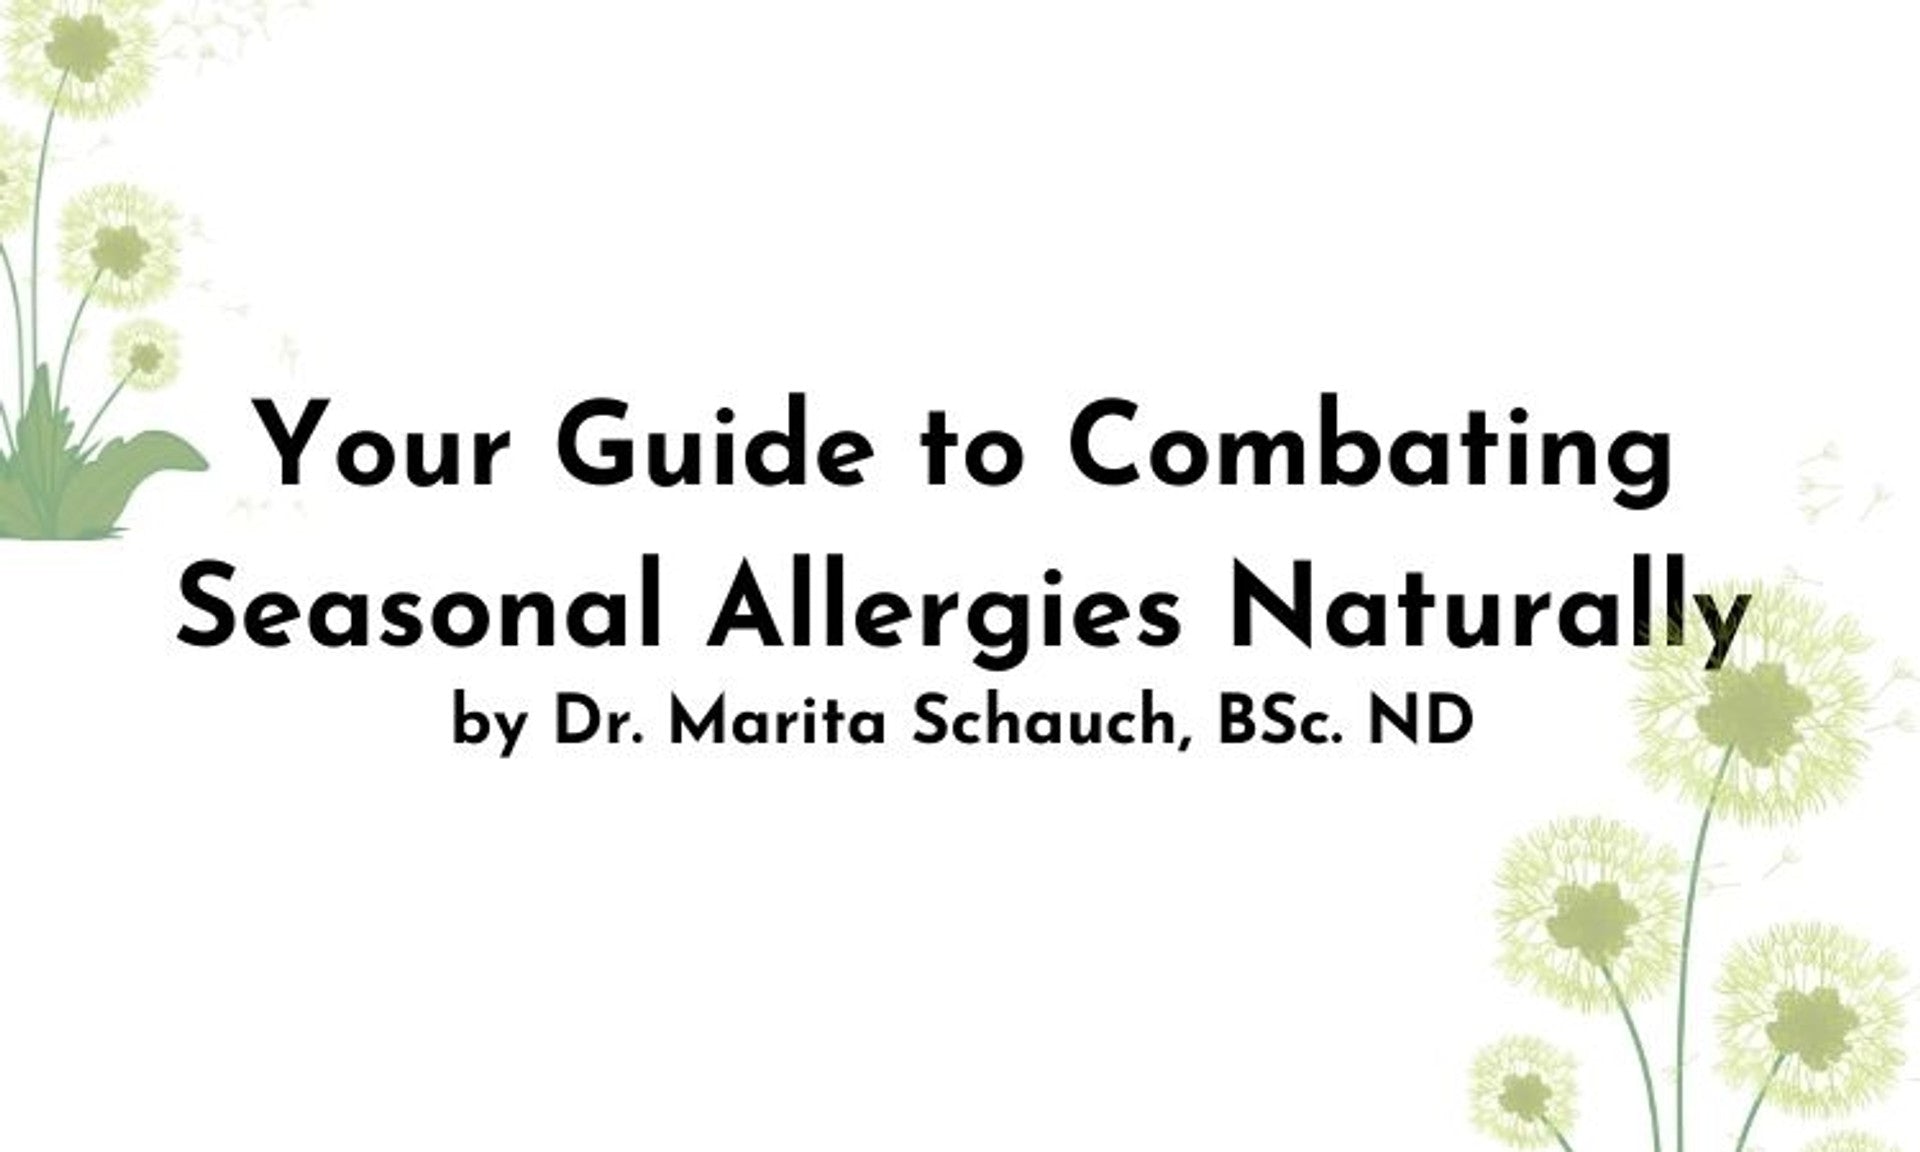 Your Guide to Combating Seasonal Allergies Naturally